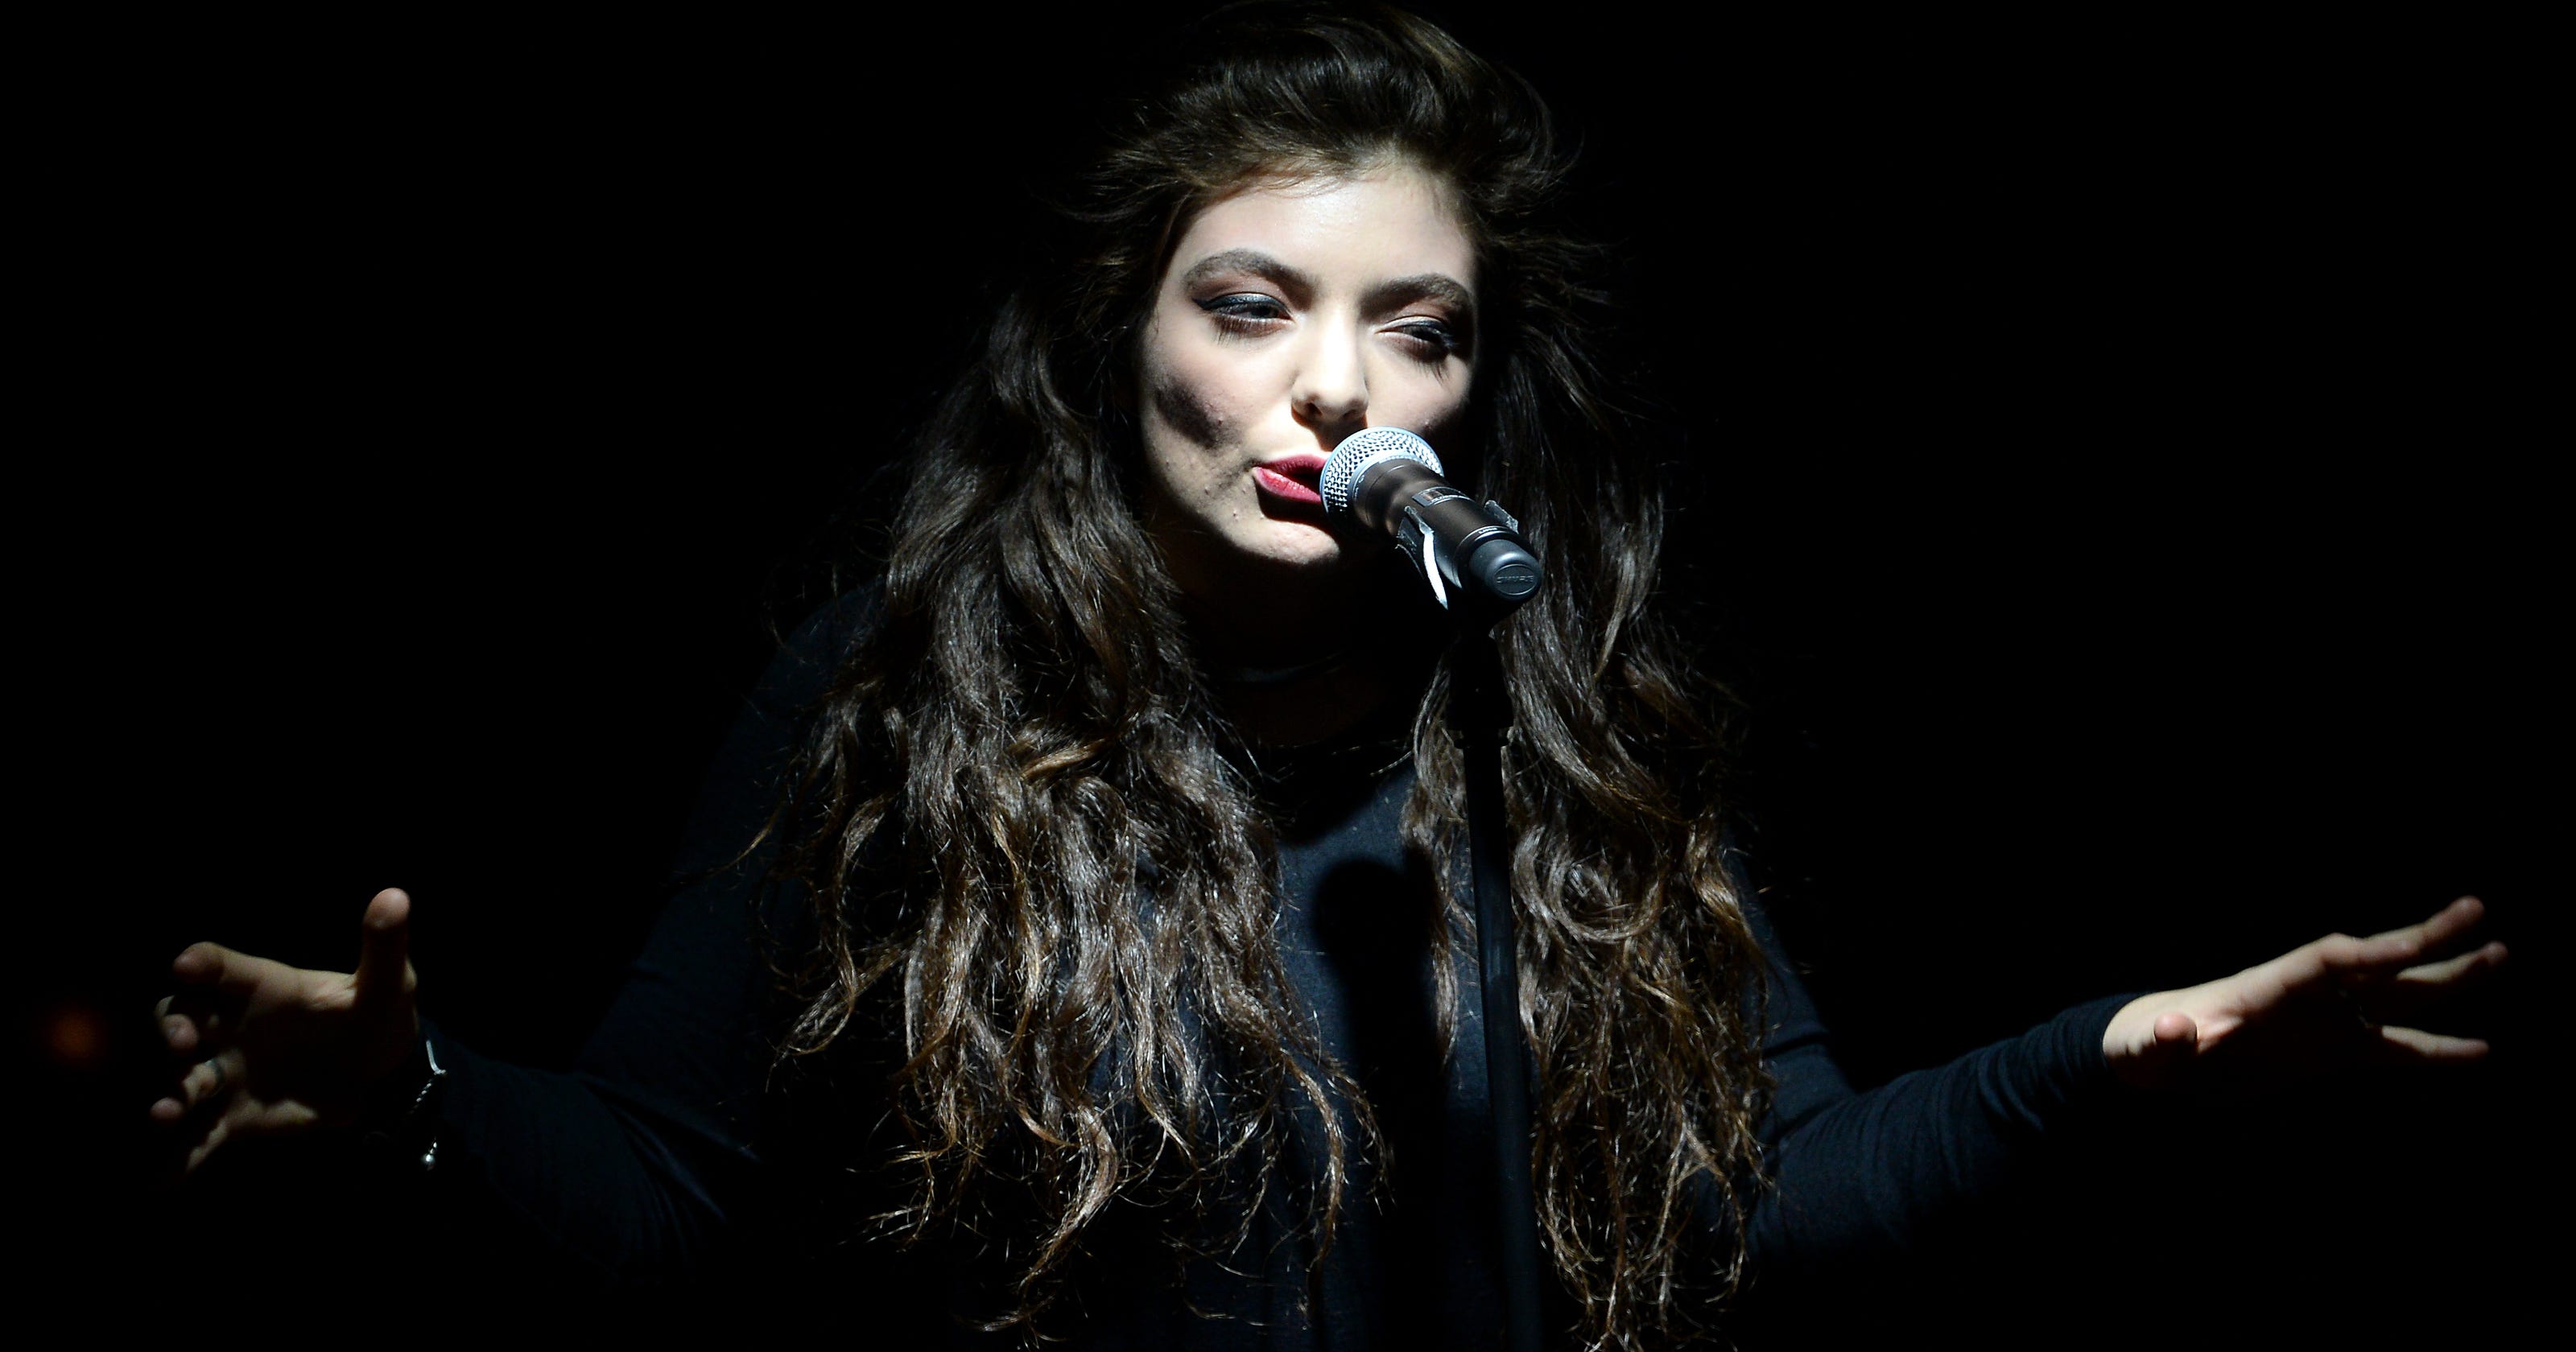 will lorde go on tour